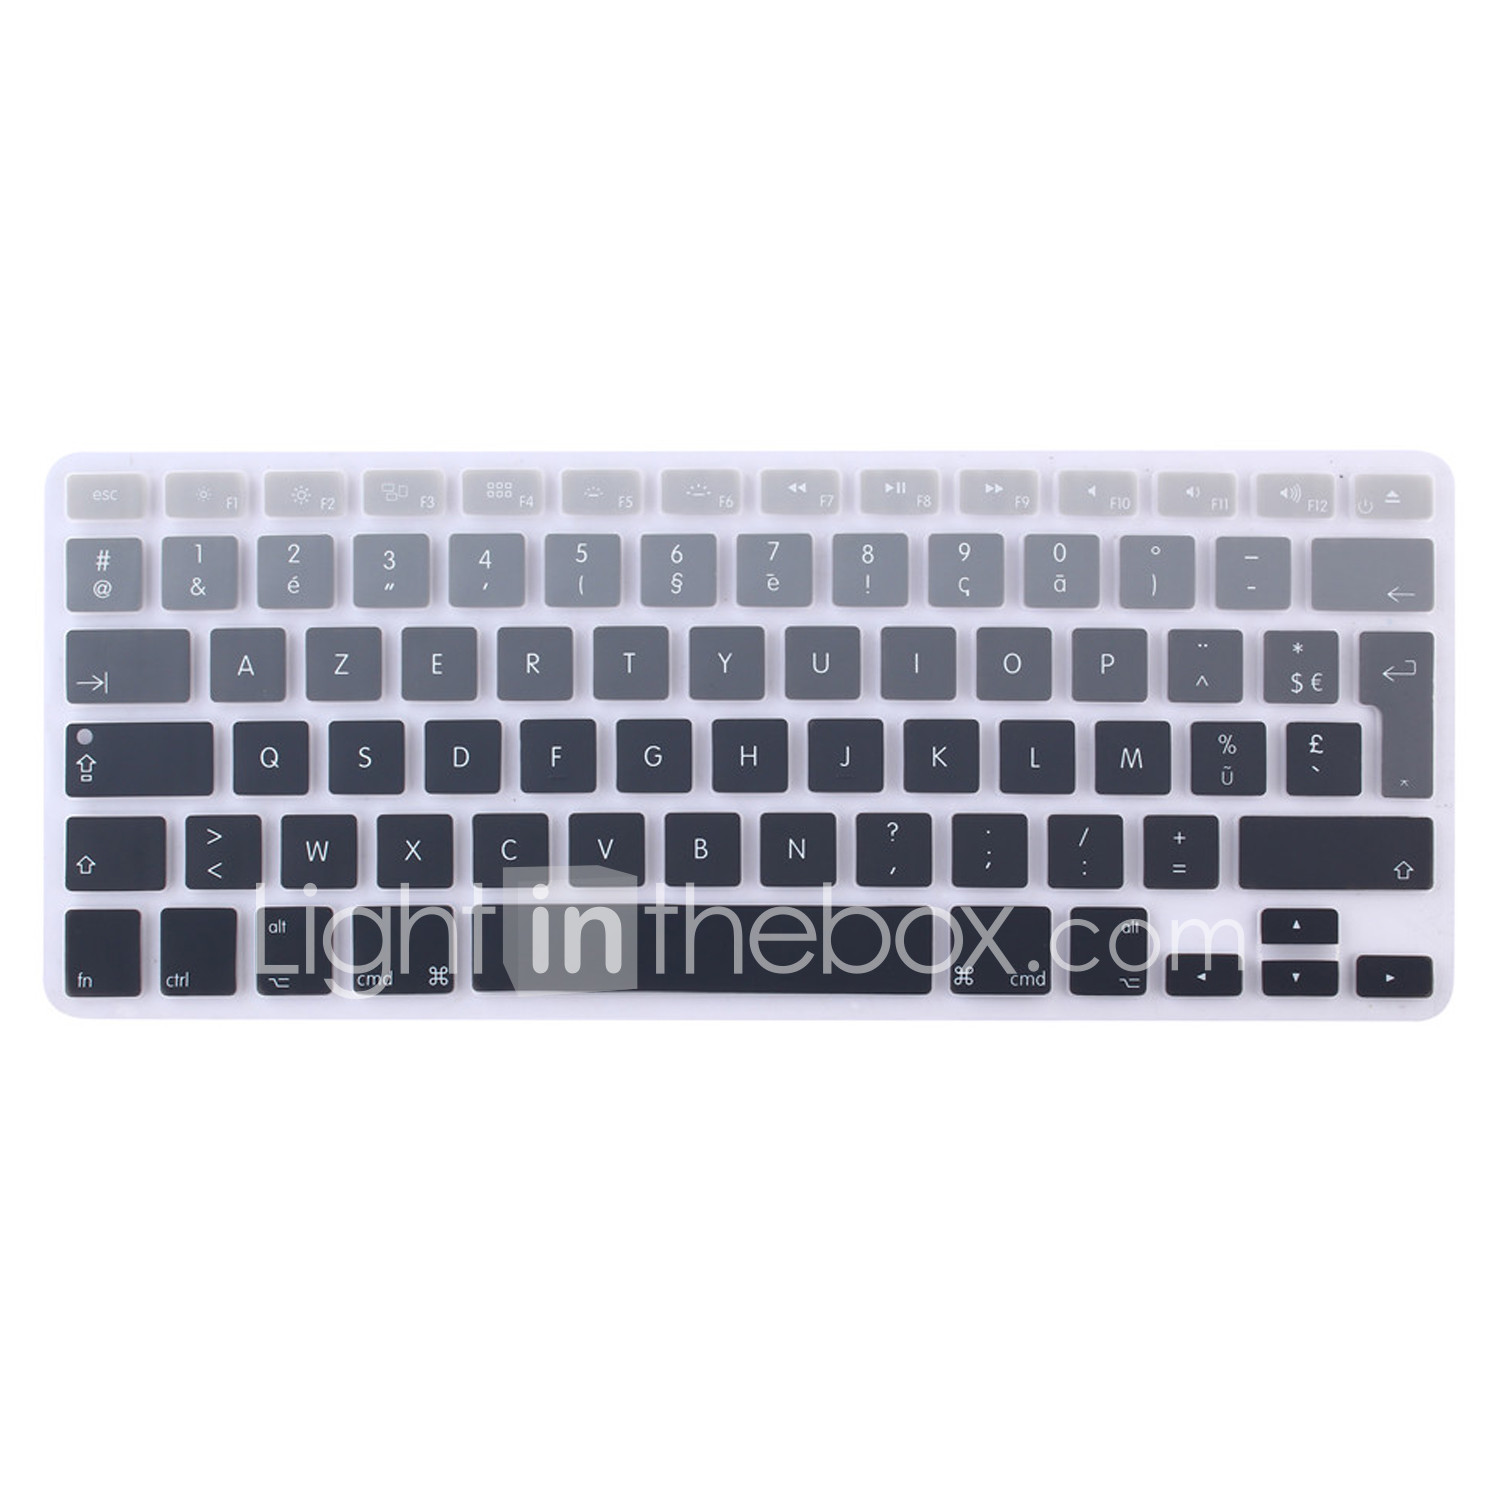 tunnel Bij zonsopgang schipper French Language AZERTY European version Silicone Keyboard Cover Skin for  MacBook Air 13.3, MacBook Pro 13.3/15.4 5114582 2020 – $5.24